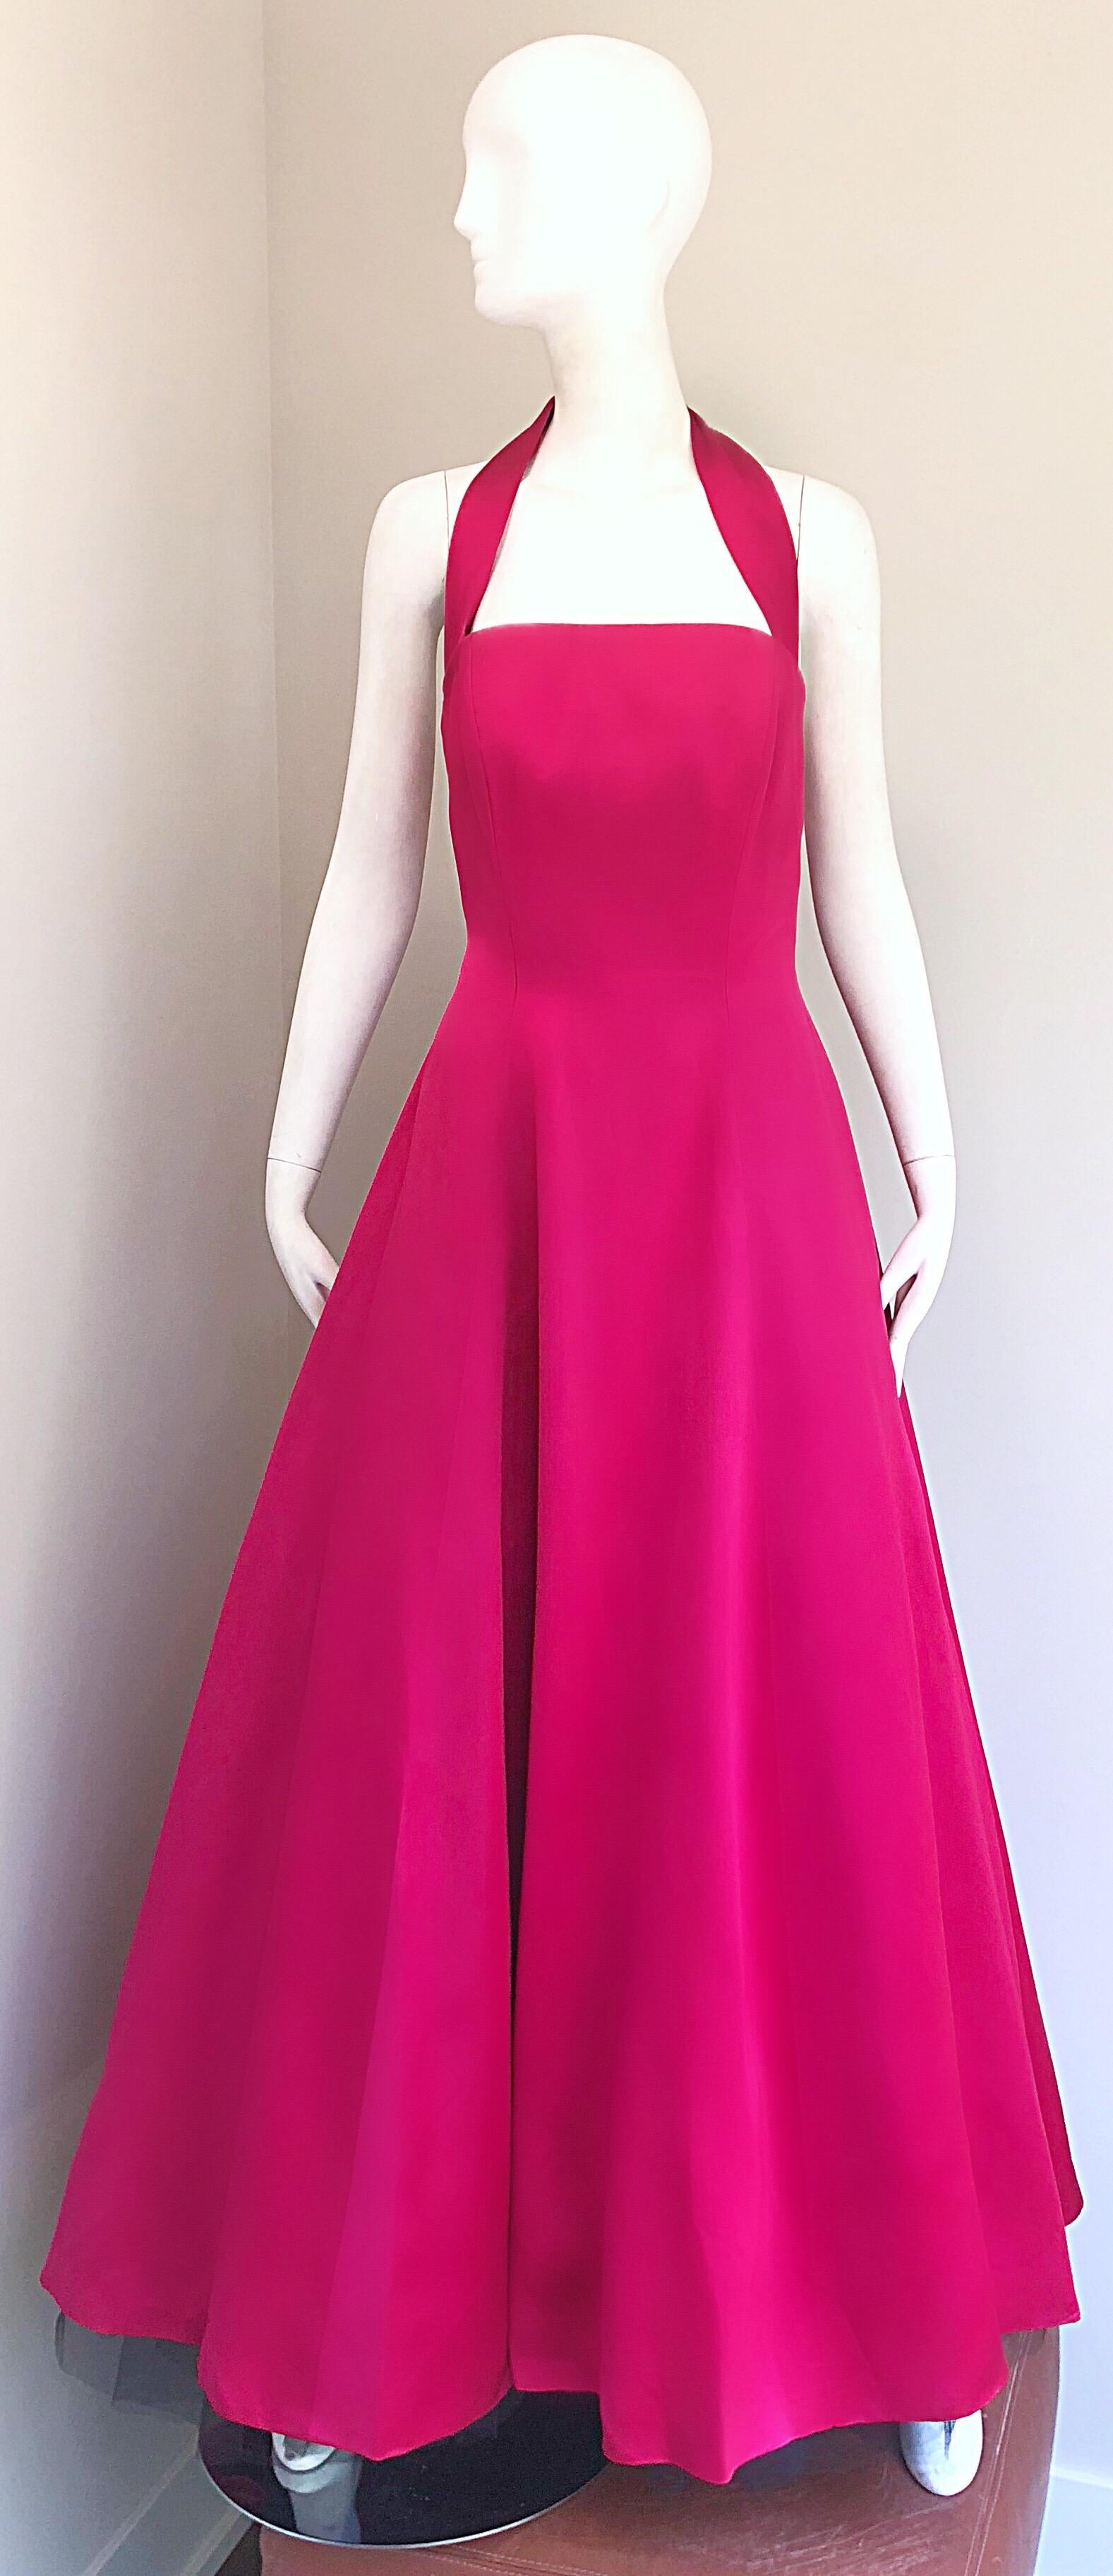 Beautiful vintage late 80s VICKY TIEL COUTURE raspberry pink silk satin halter evening dress and black crinoline skirt! Features a vibrant raspberry pink and contrasting black. Black crinoline is full length, and has a dramatic longer hem in the